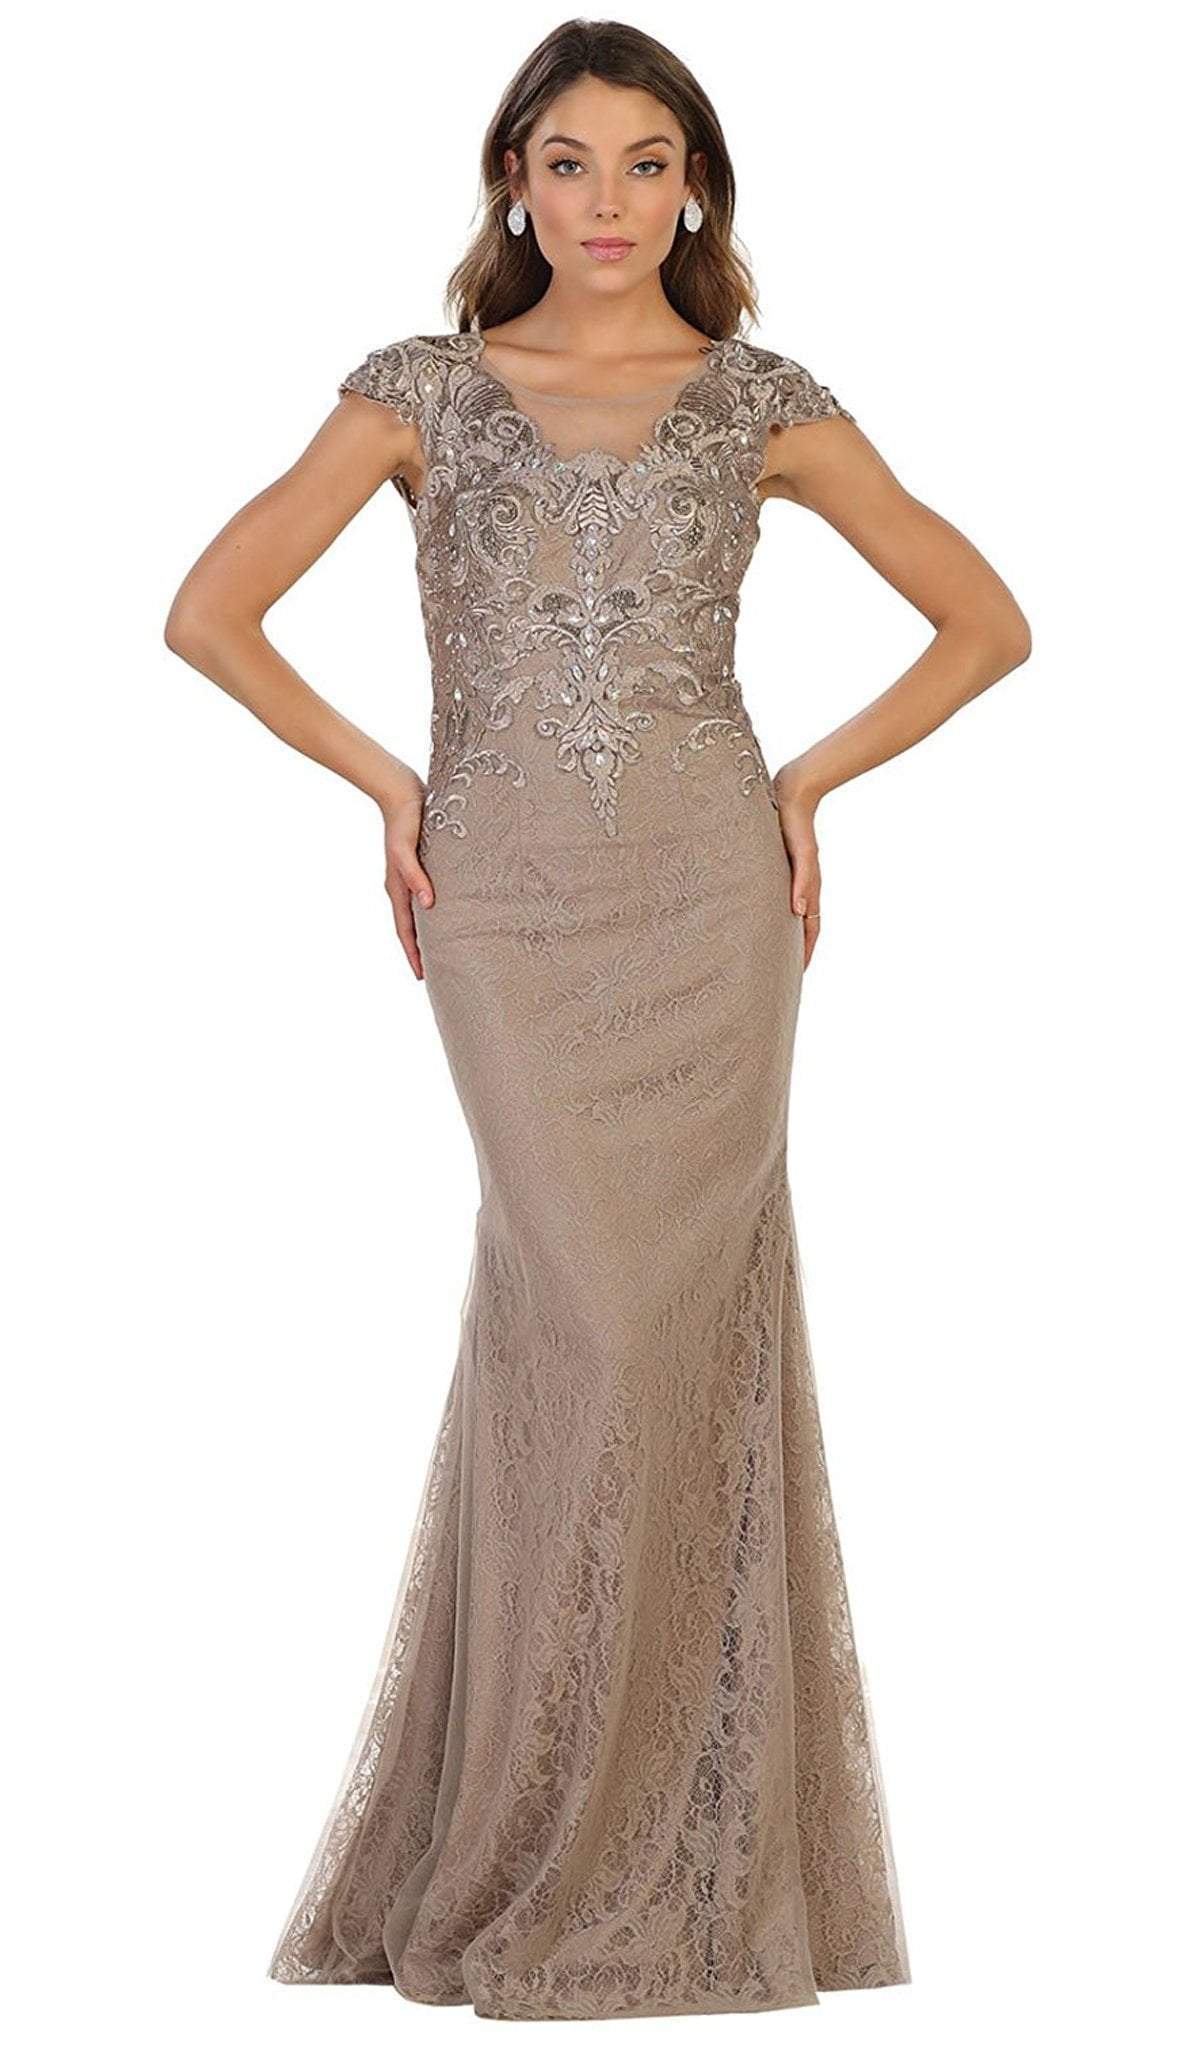 May Queen - Embellished Illusion Scoop Sheath Prom Dress Mother of the Bride 4 / Mocha